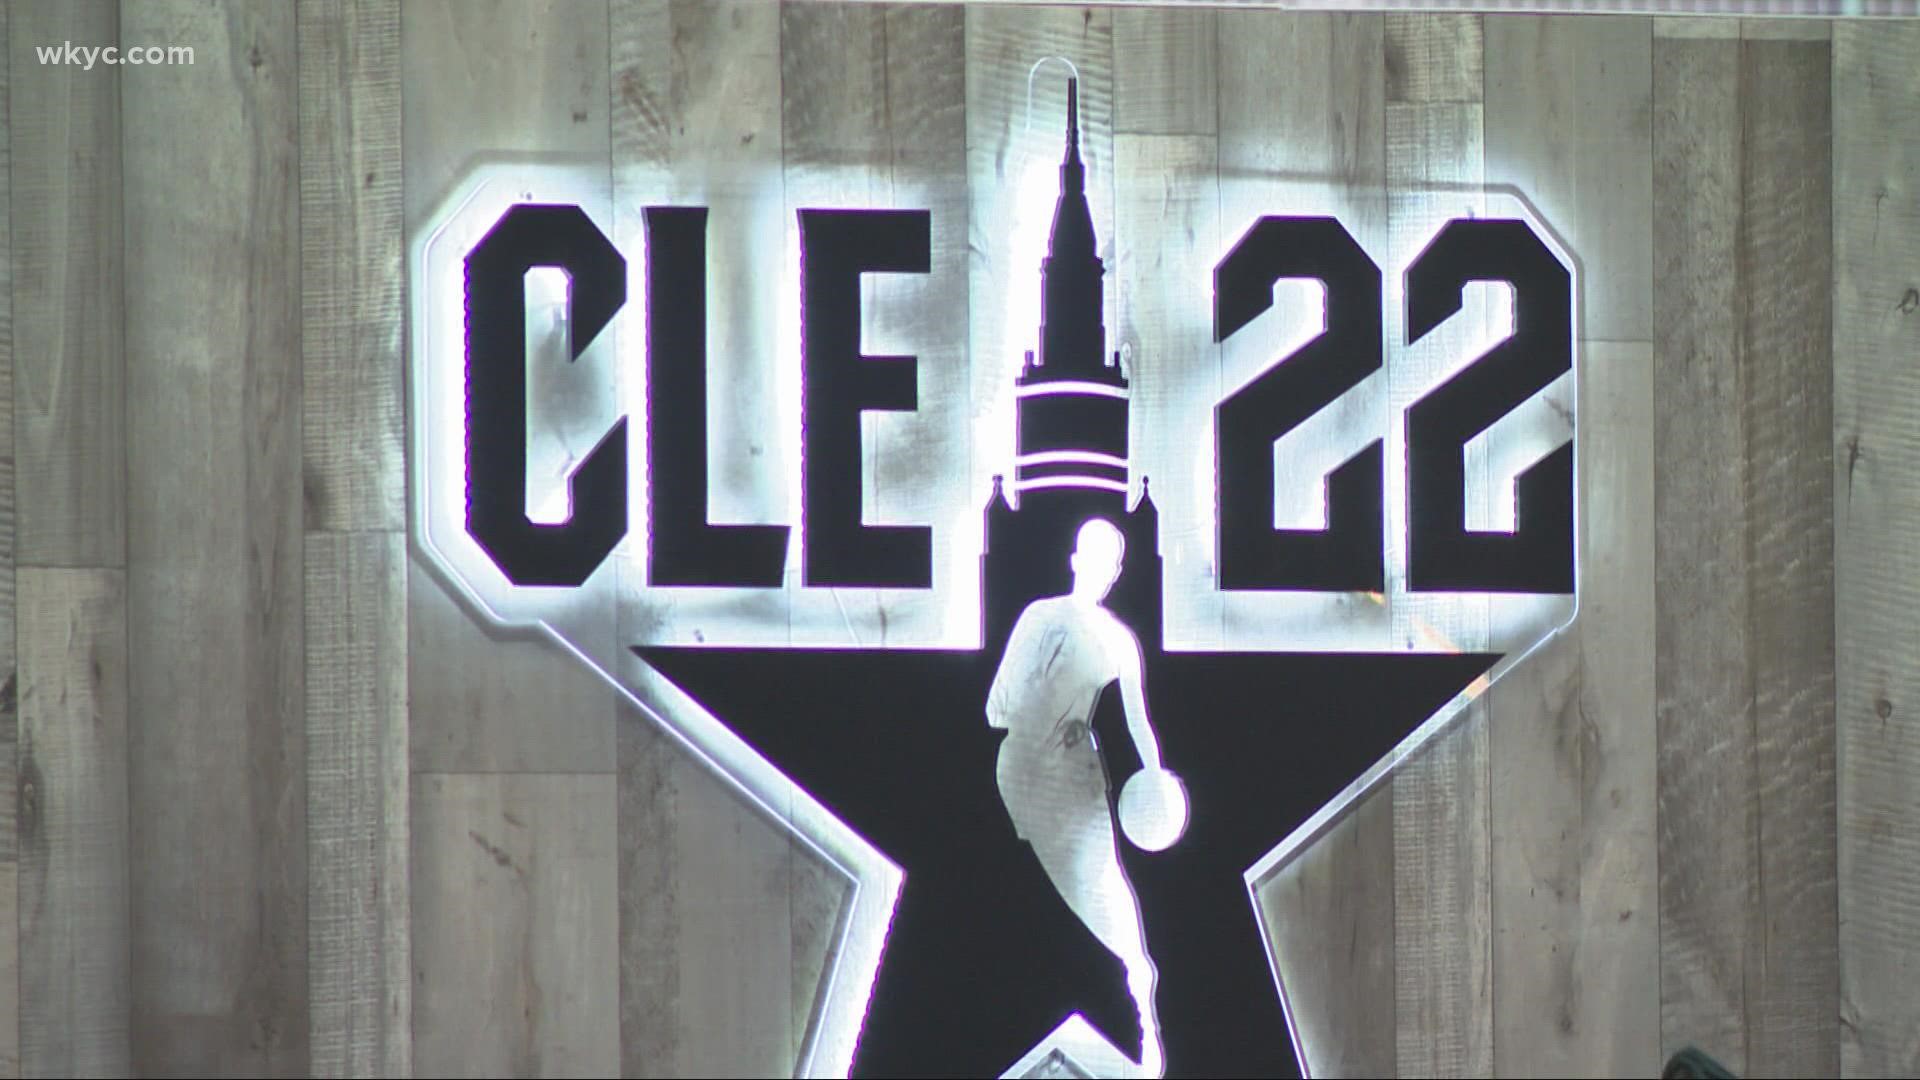 NBA All-Star weekend has taken over the city of Cleveland, put Northeast Ohio back in the national spotlight.